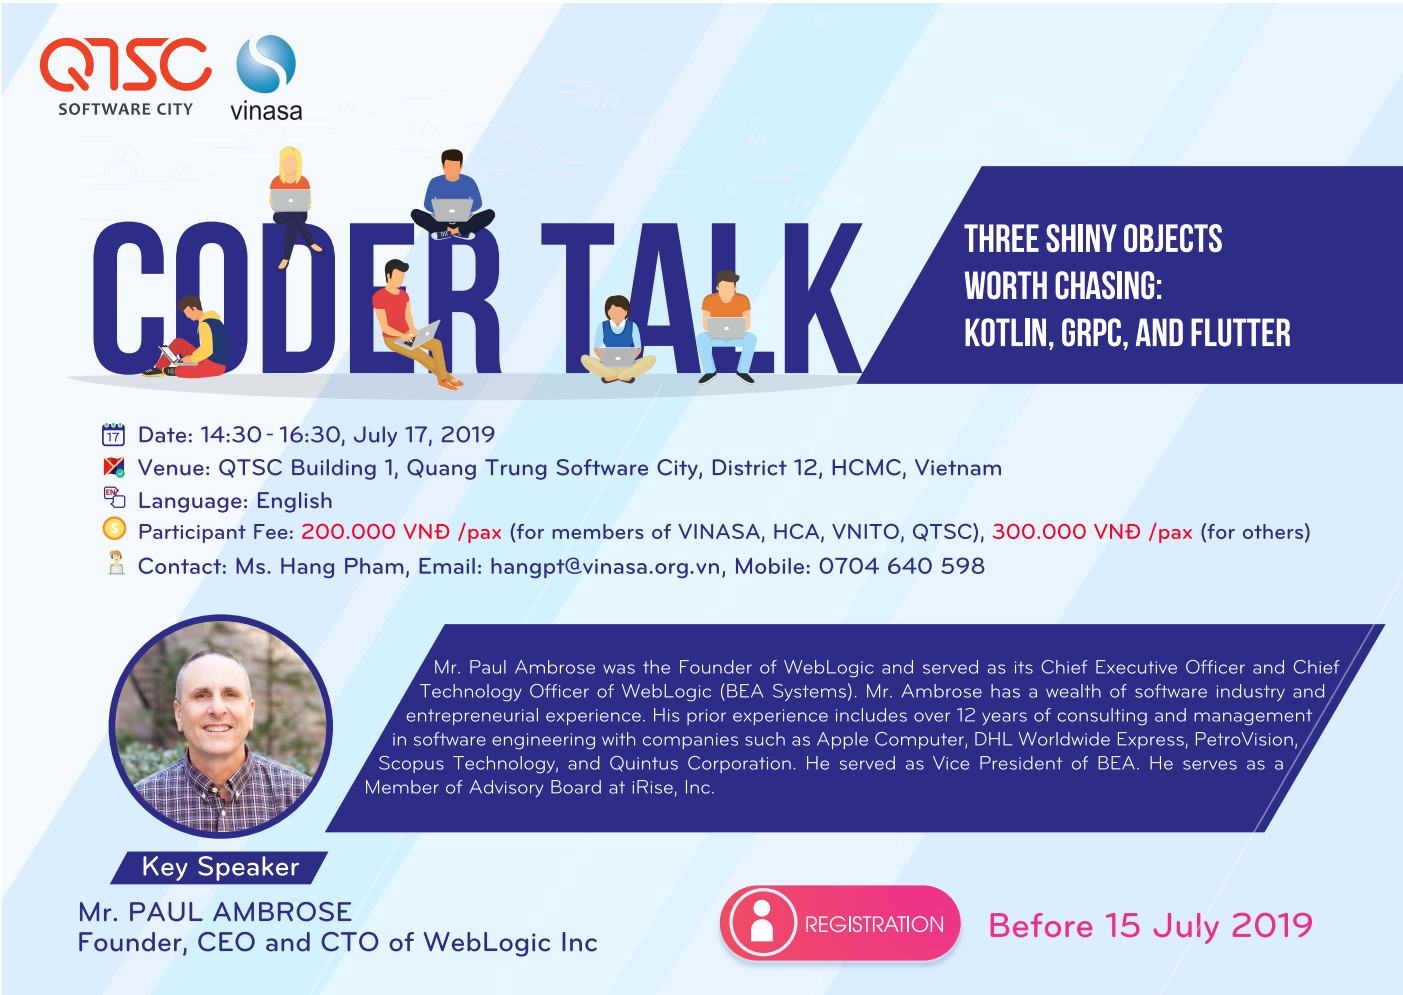 Invitation to Coder Talk: "Three Shiny Objects Worth Chasing: Kotlin, gRPC, and Flutter”